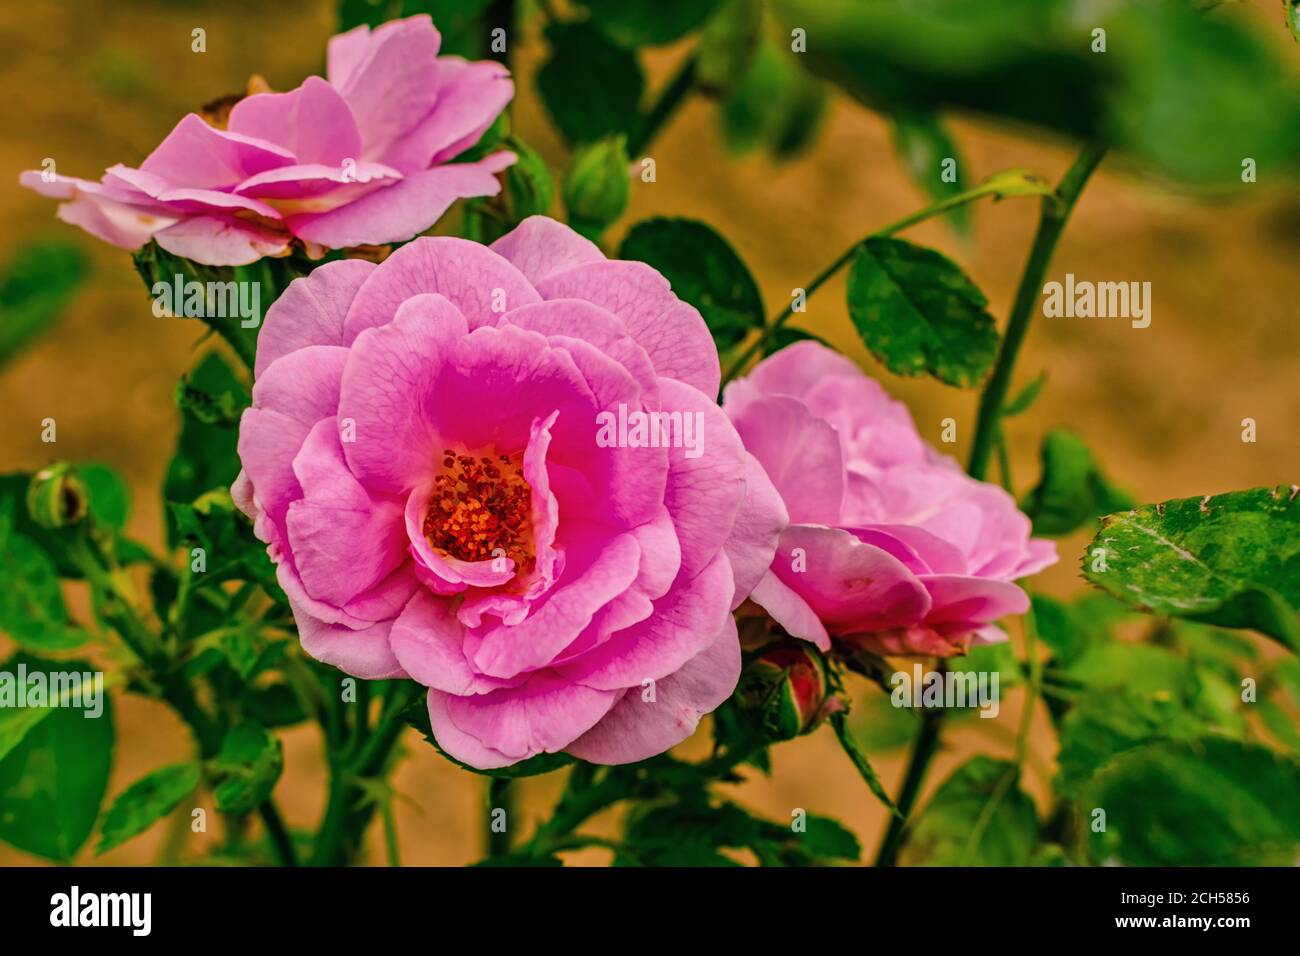 Rose With Thorns High Resolution Stock Photography and Images - Alamy